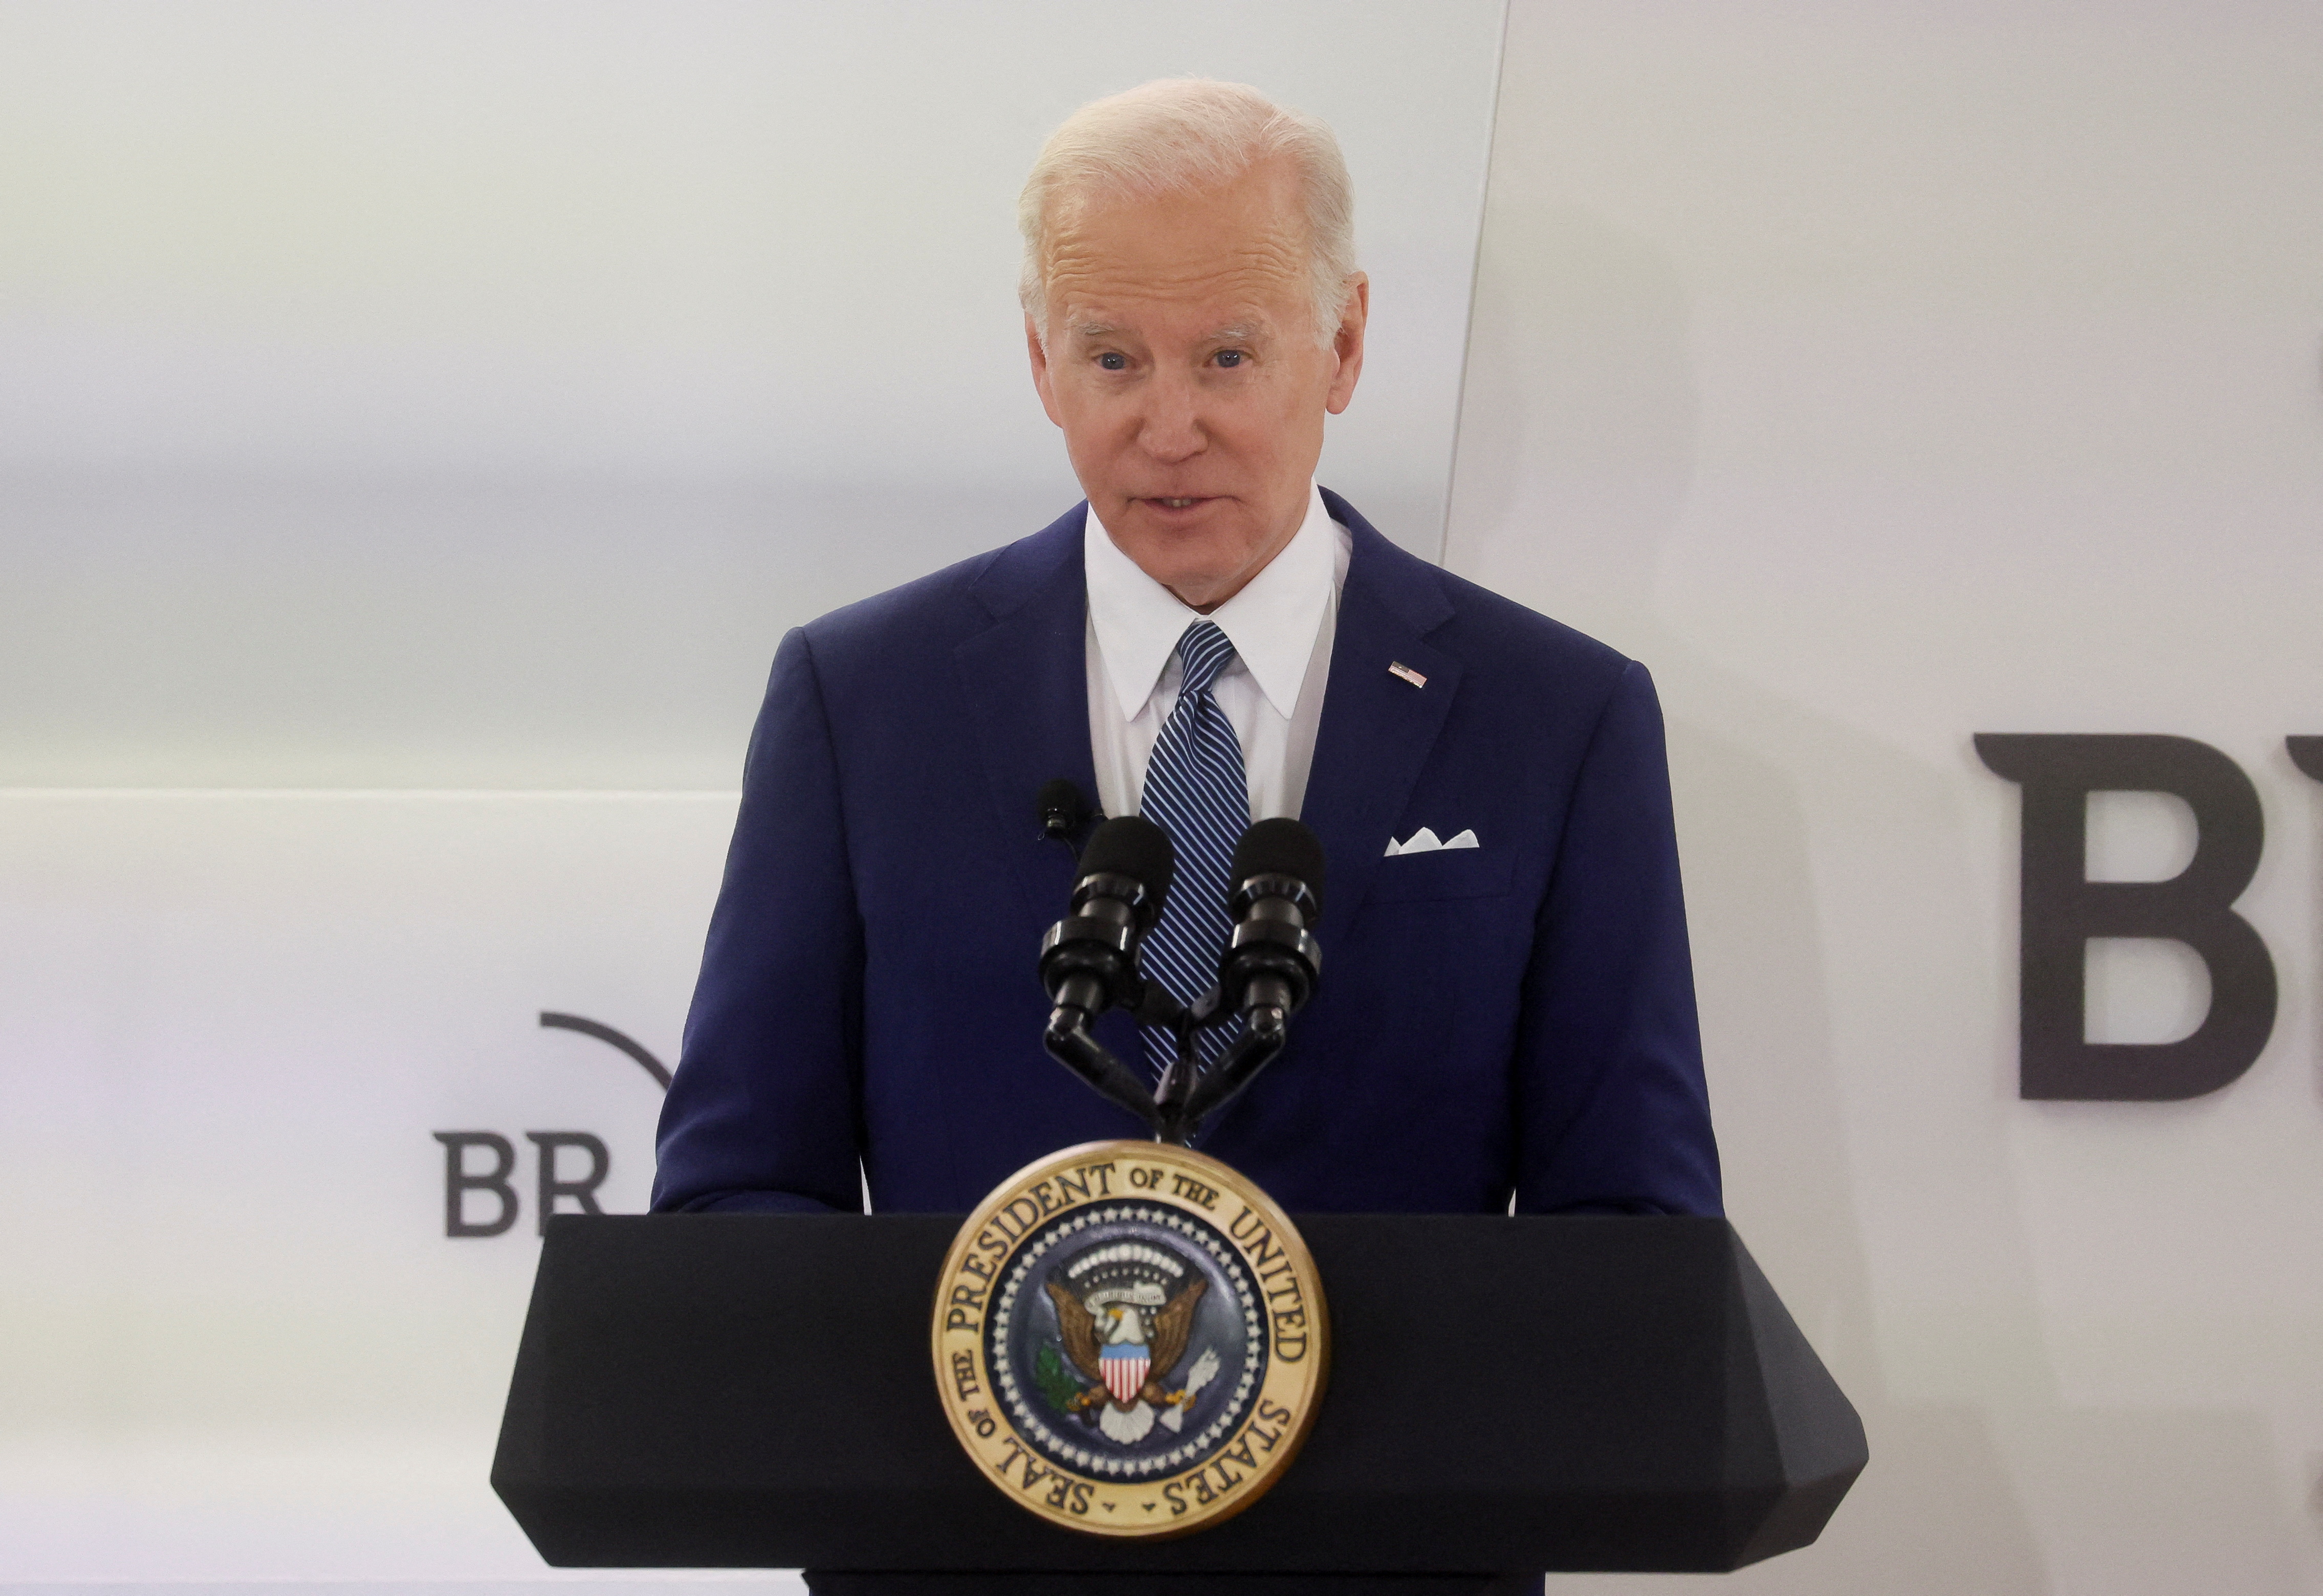 U.S. President Biden discusses the United States' response to Russian invasion of Ukraine, and warns CEOs about potential cyber attacks from Russia, in Washington